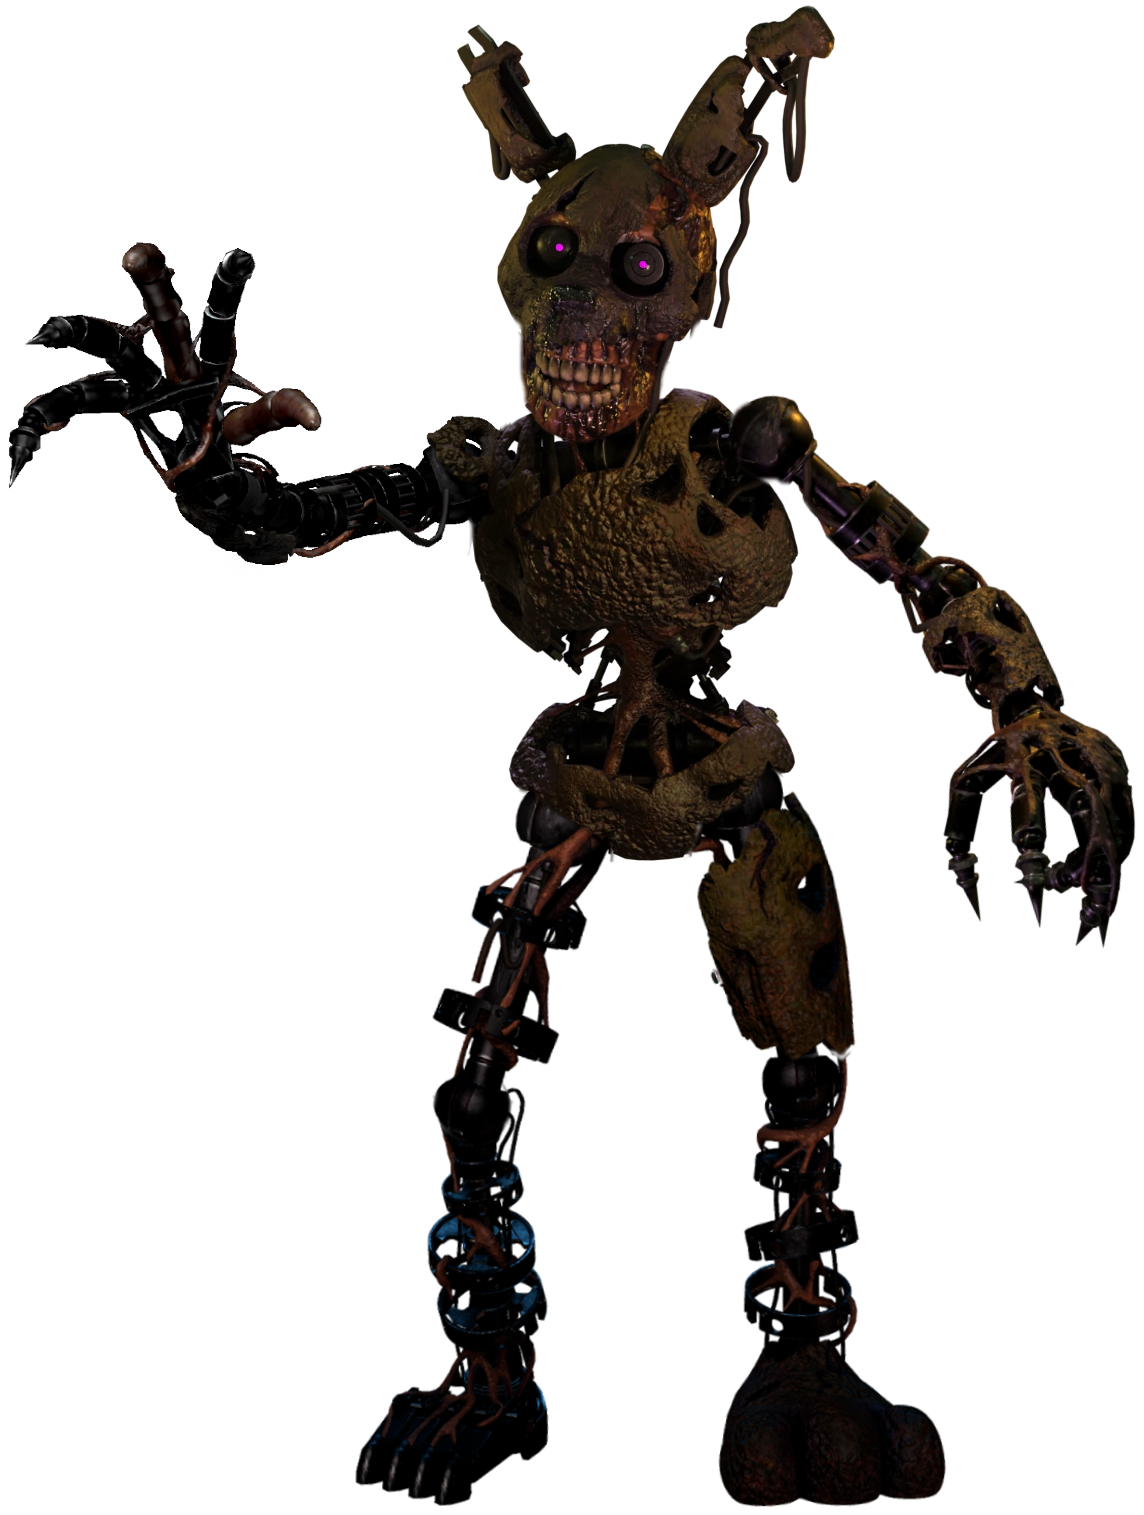 Pre-Withered Chica by BlueBearStudios07 on DeviantArt